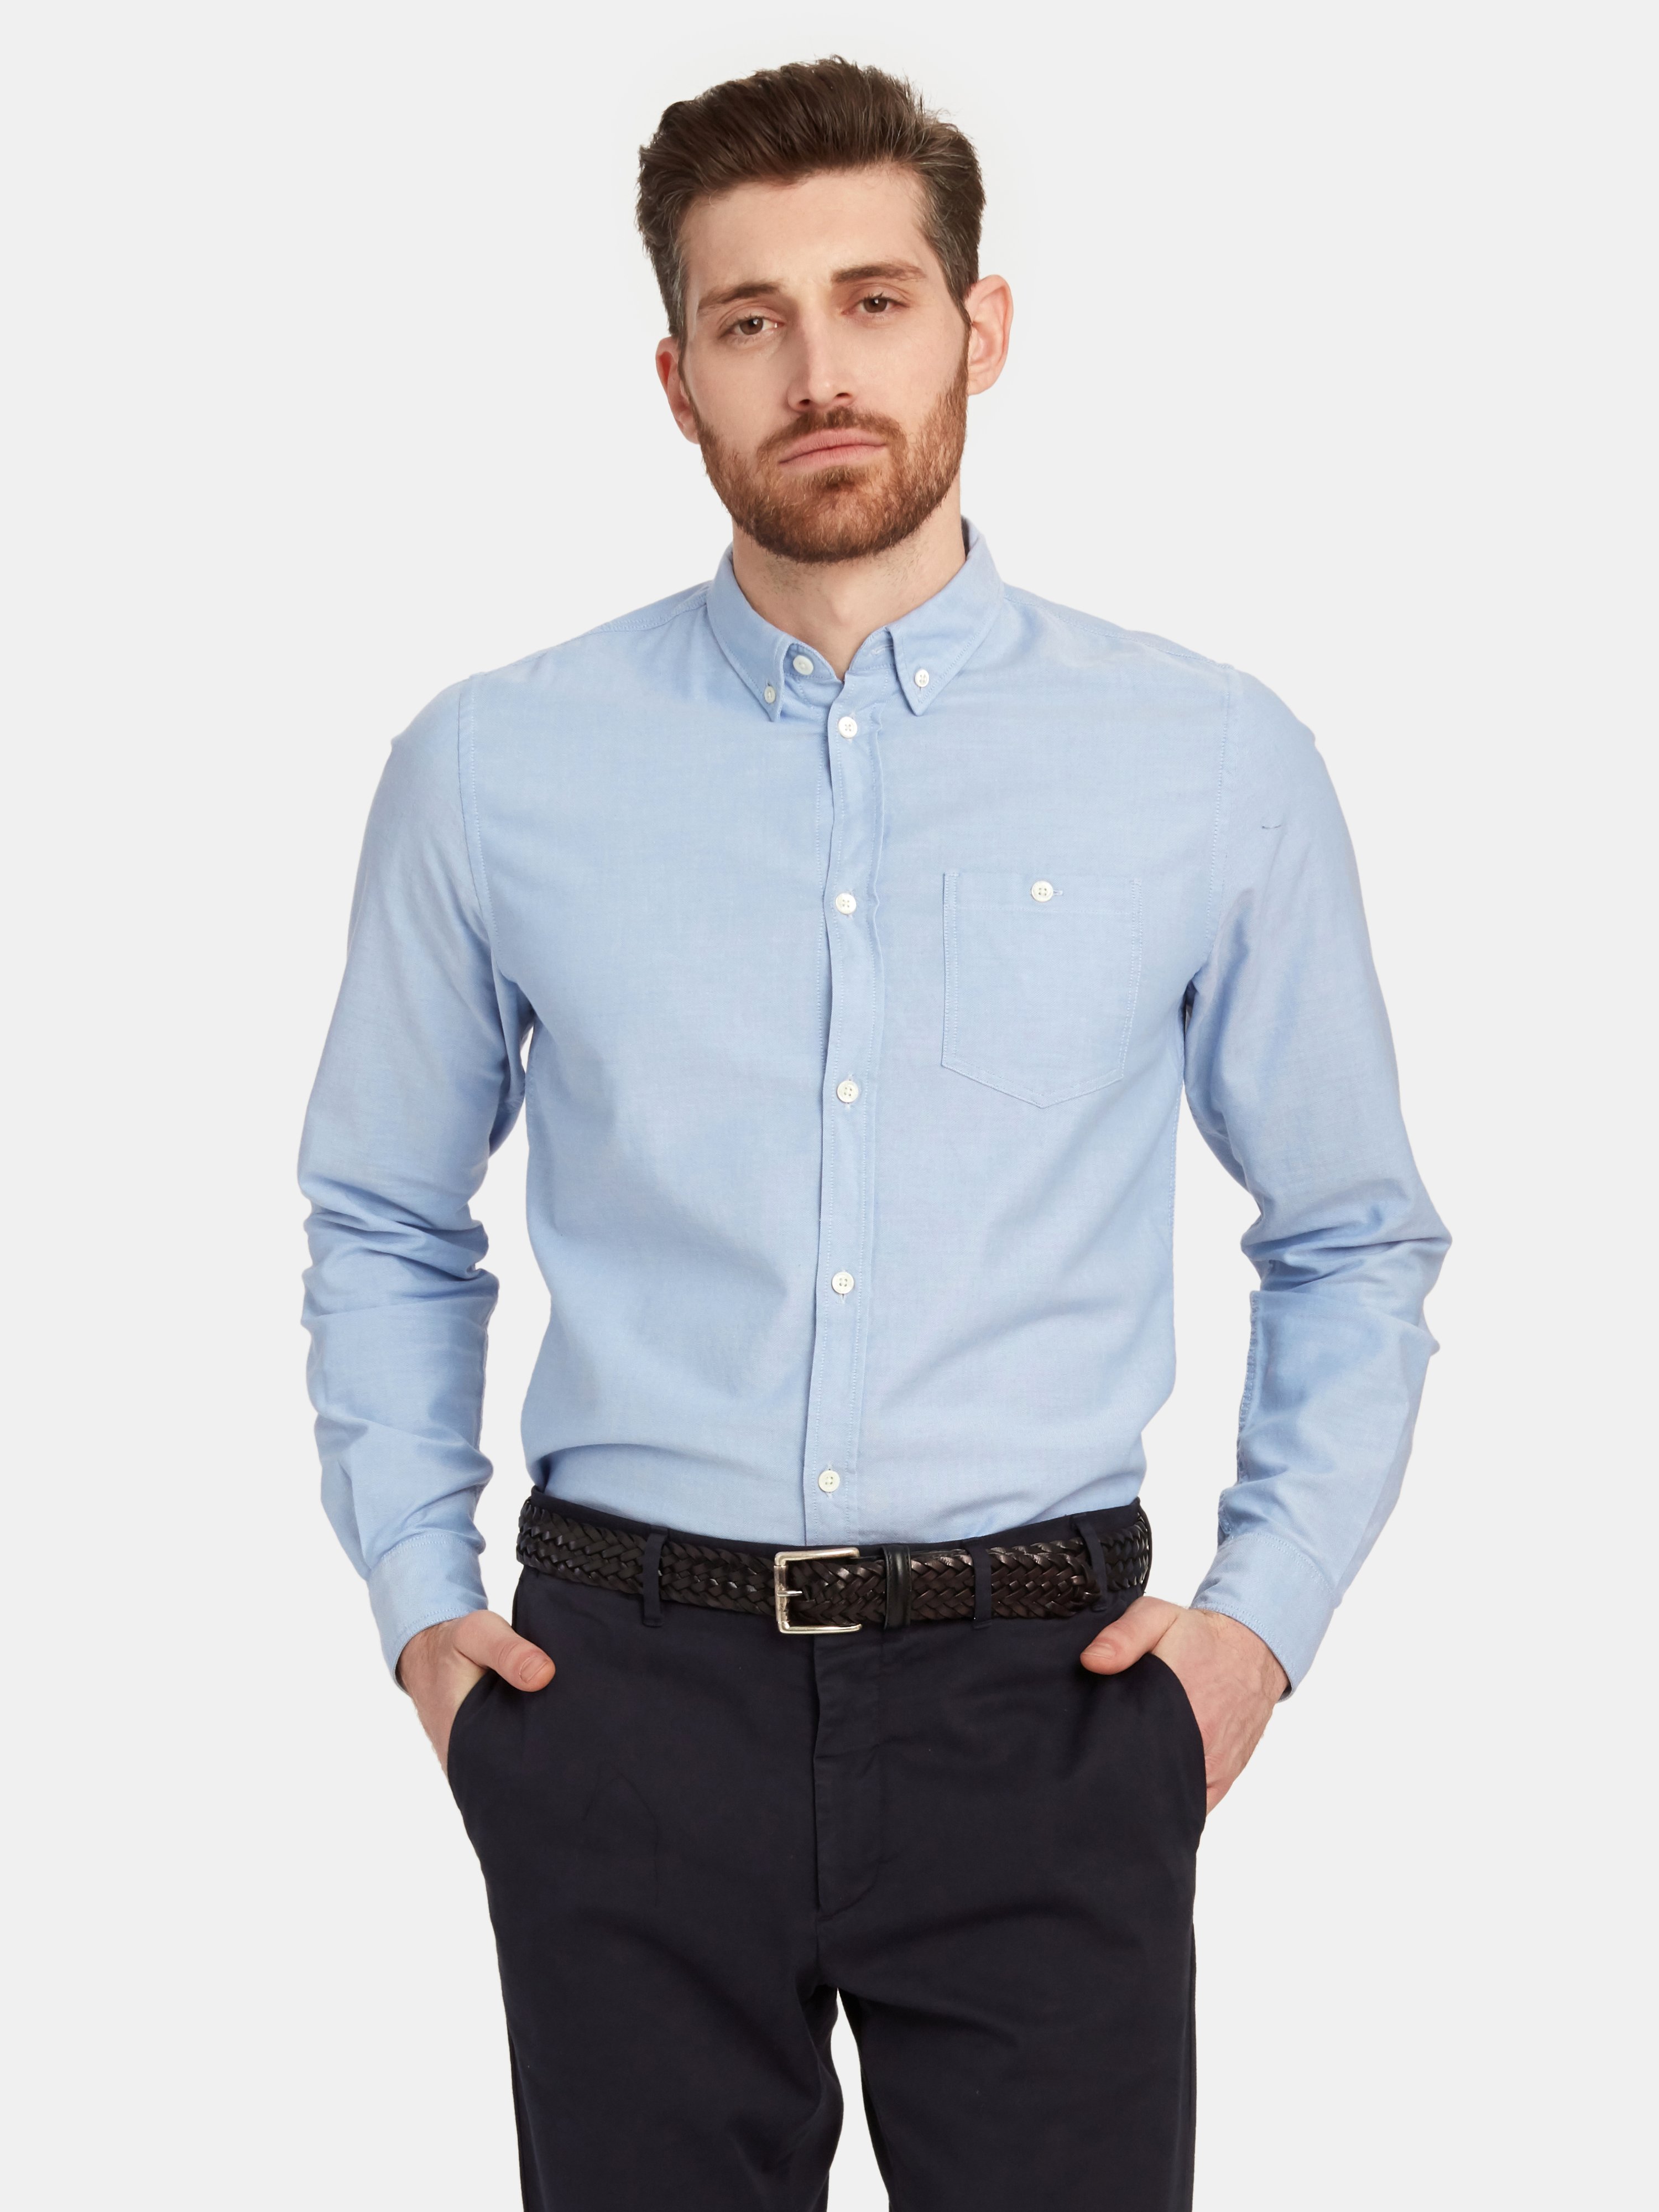 Norse Projects Anton Oxford Shirt In Pale Blue 7105